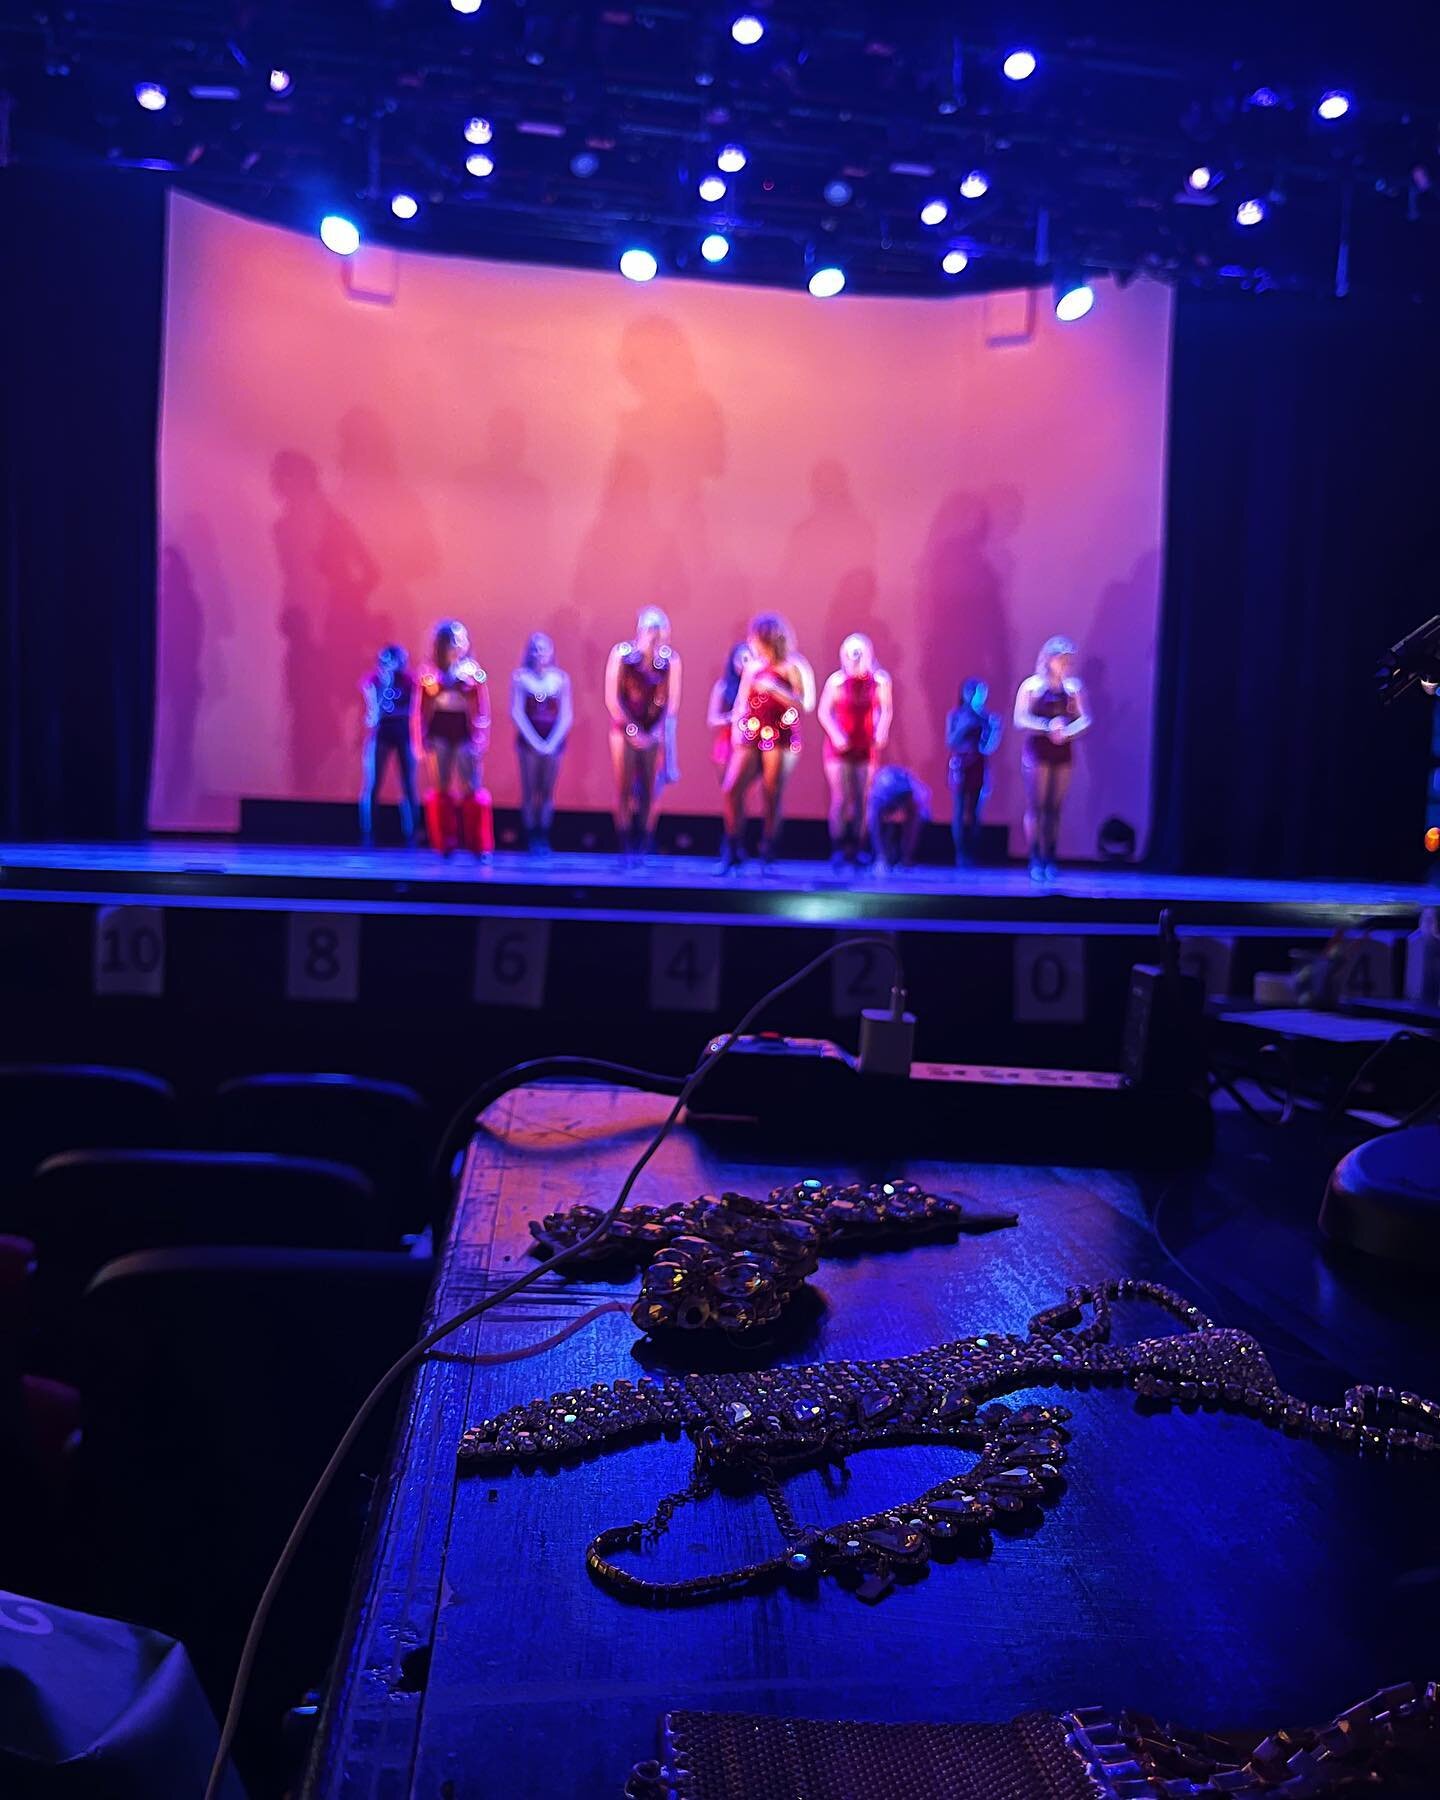 &bull;Day II of techs. 
.
A pleasantly blingy tech table.
.
12ish hours of rhinestone goodness today.
.
Having a lot of fun with costuming @rhondakmiller &lsquo;s latest work on the talented dancers @pacecommercialdance !
.
#rhondamiller #commerciald